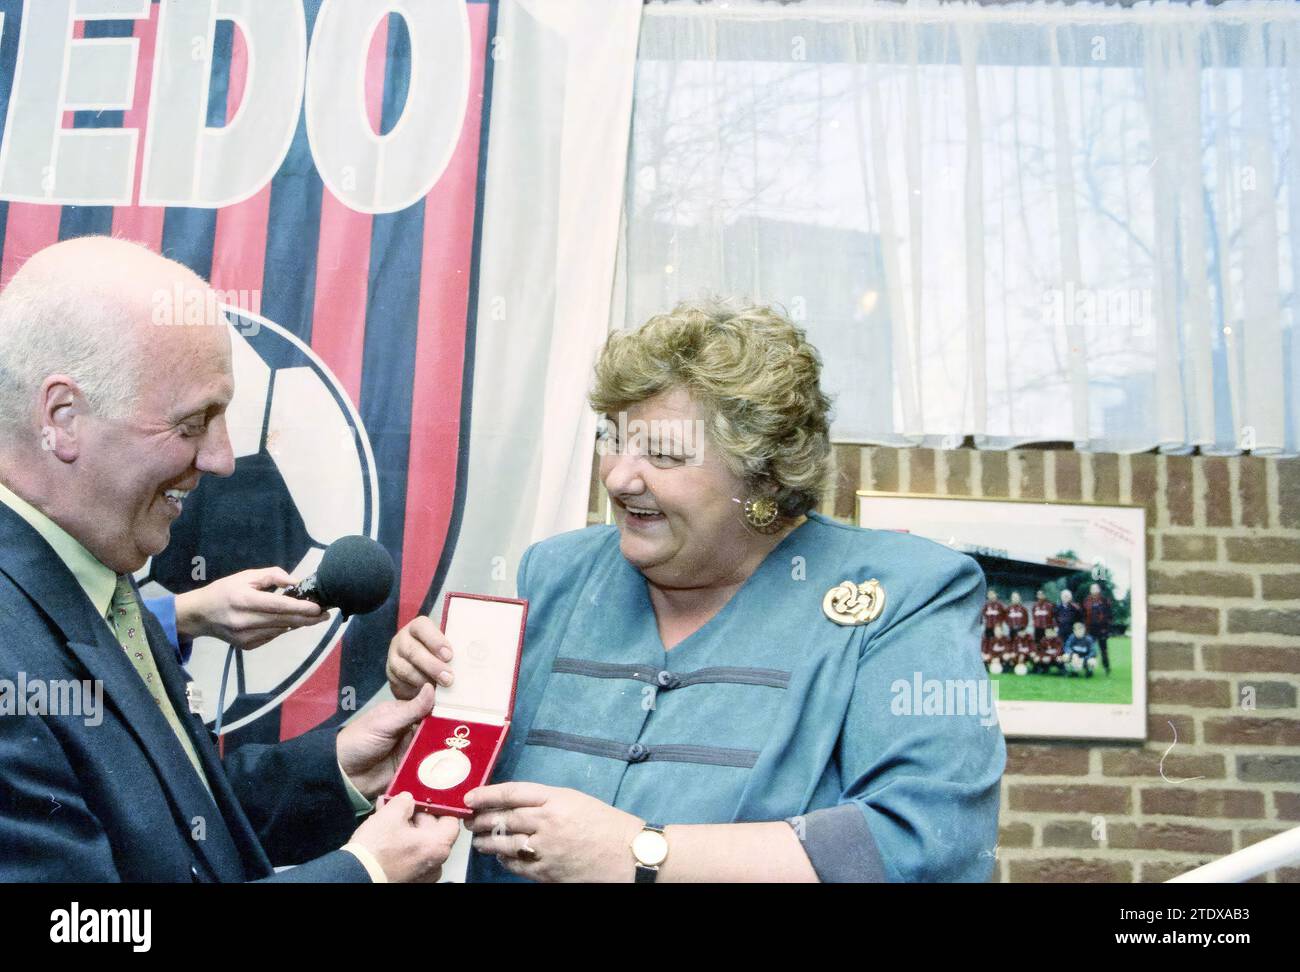 The Haarlem football club EDO has existed for a hundred years and has been awarded the Royal Medal of Honor by State Secretary Erica Terpstra of Health, Welfare and Sport., Haarlem, The Netherlands, 01-03-1997, Whizgle News from the Past, Tailored for the Future. Explore historical narratives, Dutch The Netherlands agency image with a modern perspective, bridging the gap between yesterday's events and tomorrow's insights. A timeless journey shaping the stories that shape our future. Stock Photo